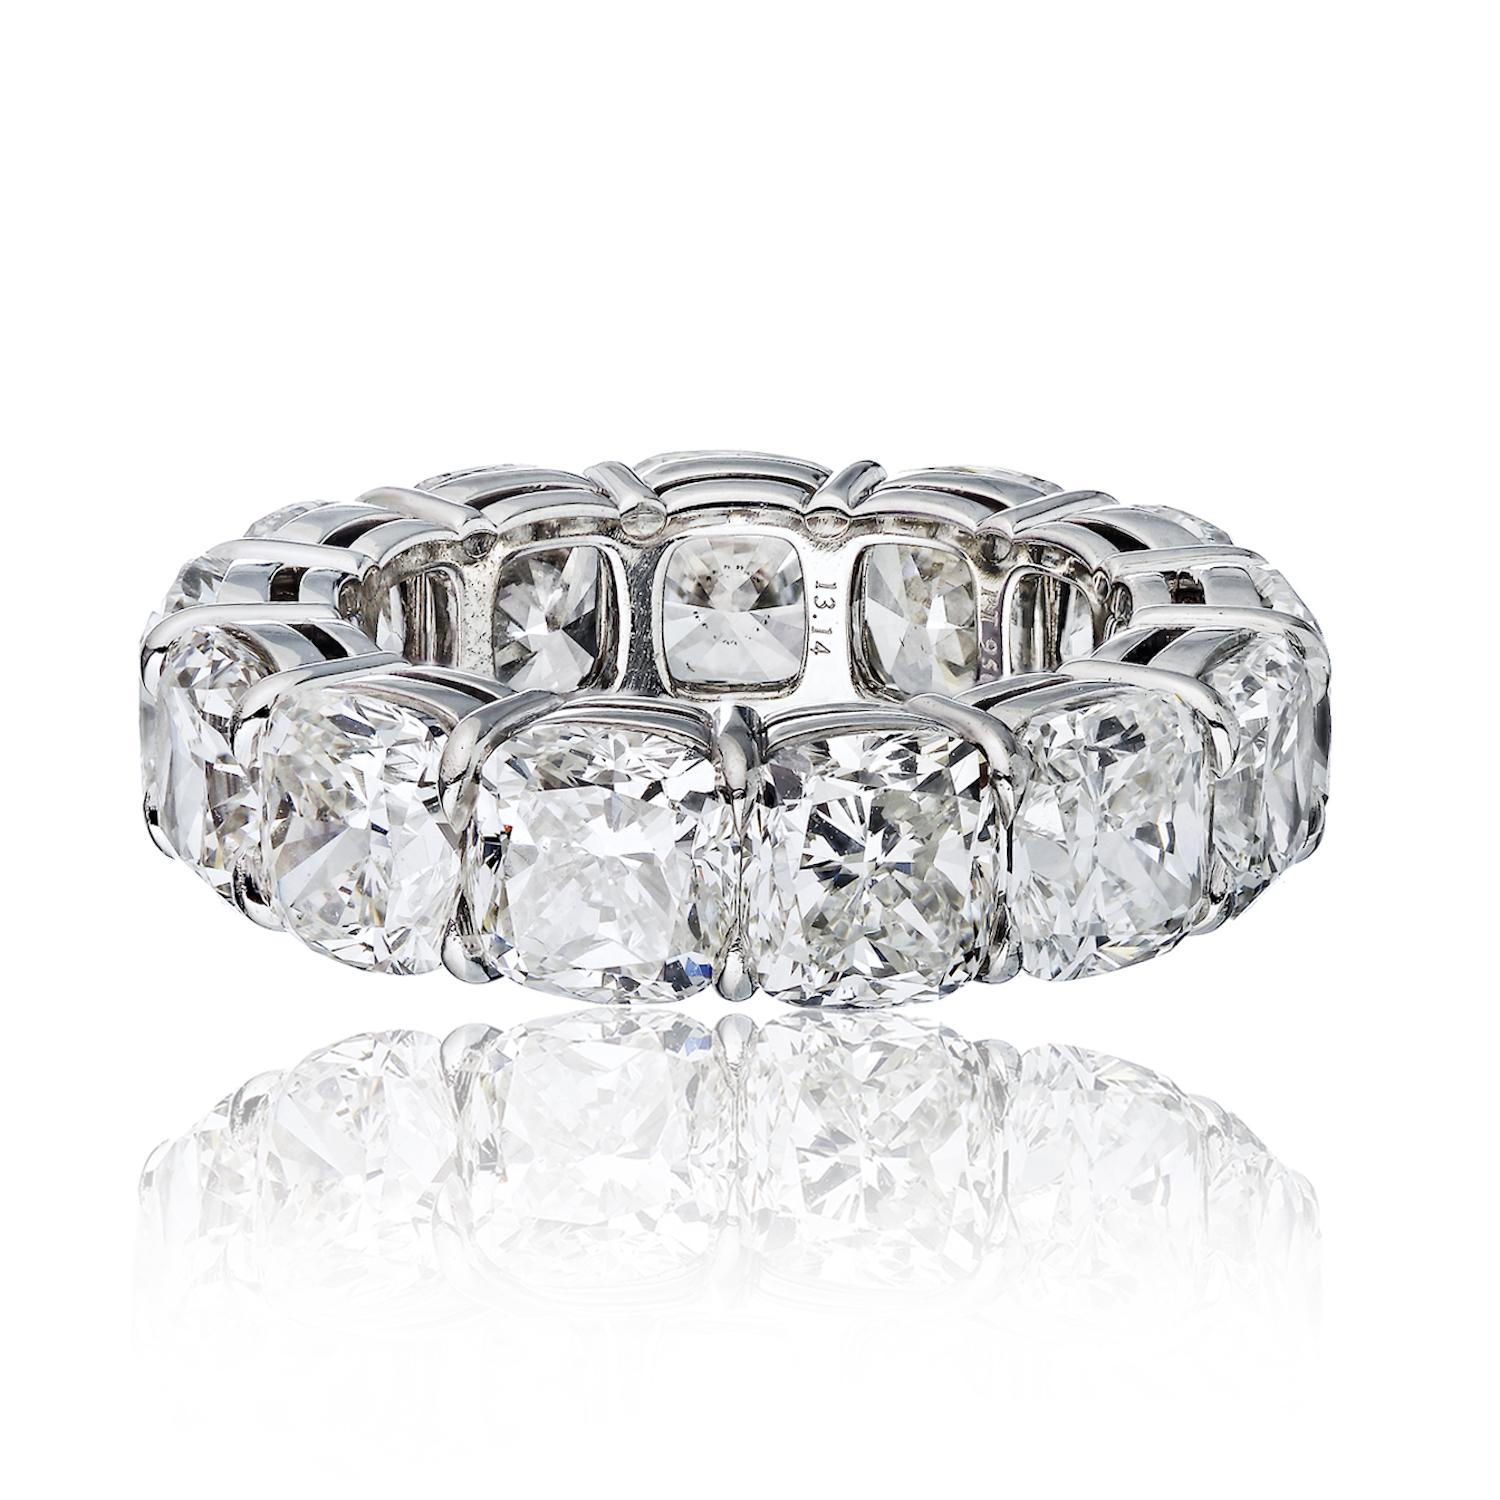 Elevate your style and celebrate love with this stunning diamond eternity band. 

This platinum ring boasts an array of opulent cushion-cut diamonds, each GIA certified for quality and precision. The stones showcase a captivating range of G to H